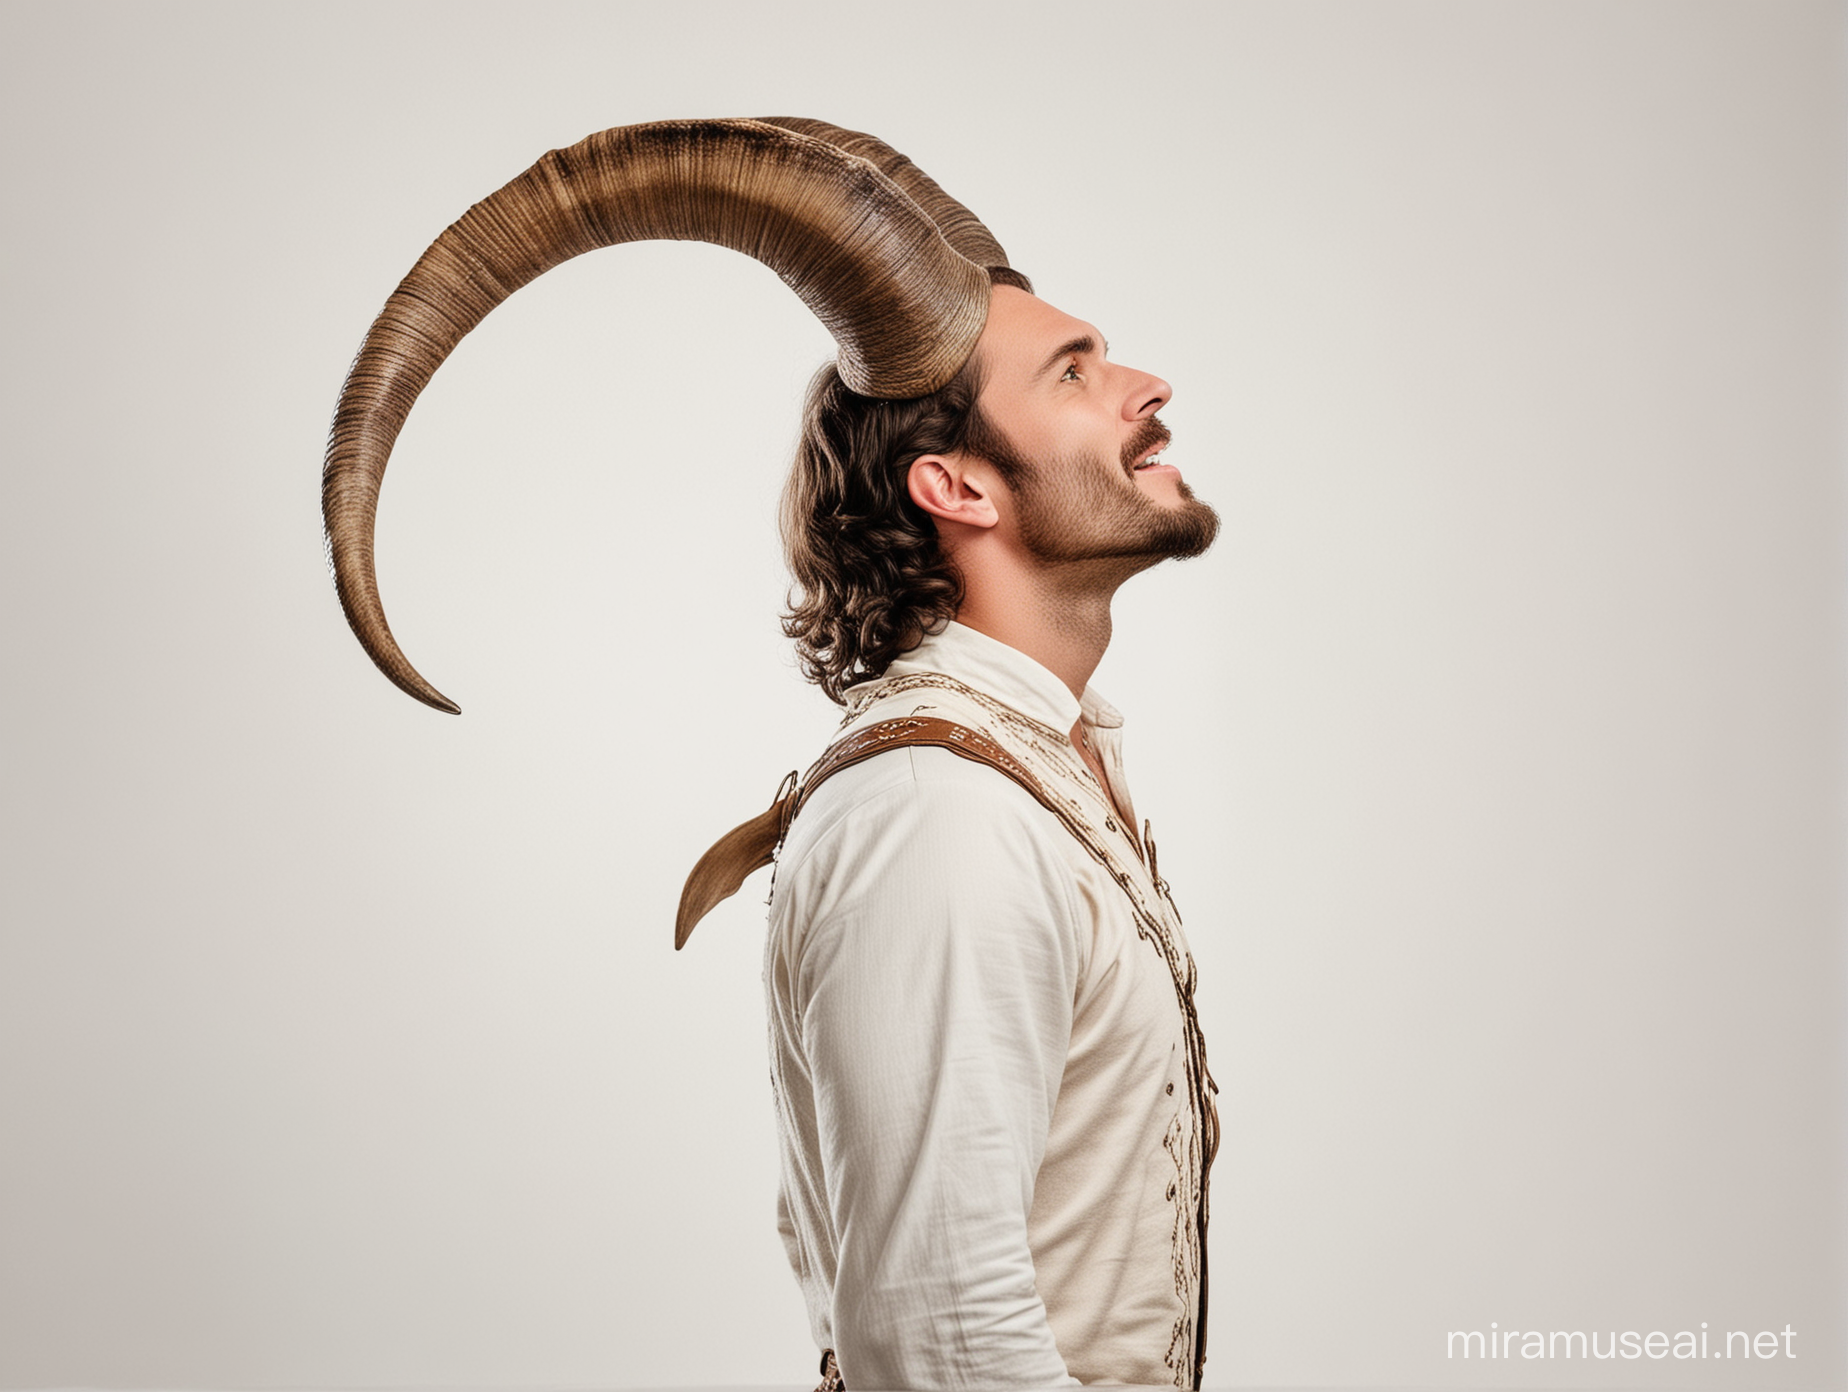 man with rams horns looking up, side view of full body, white background